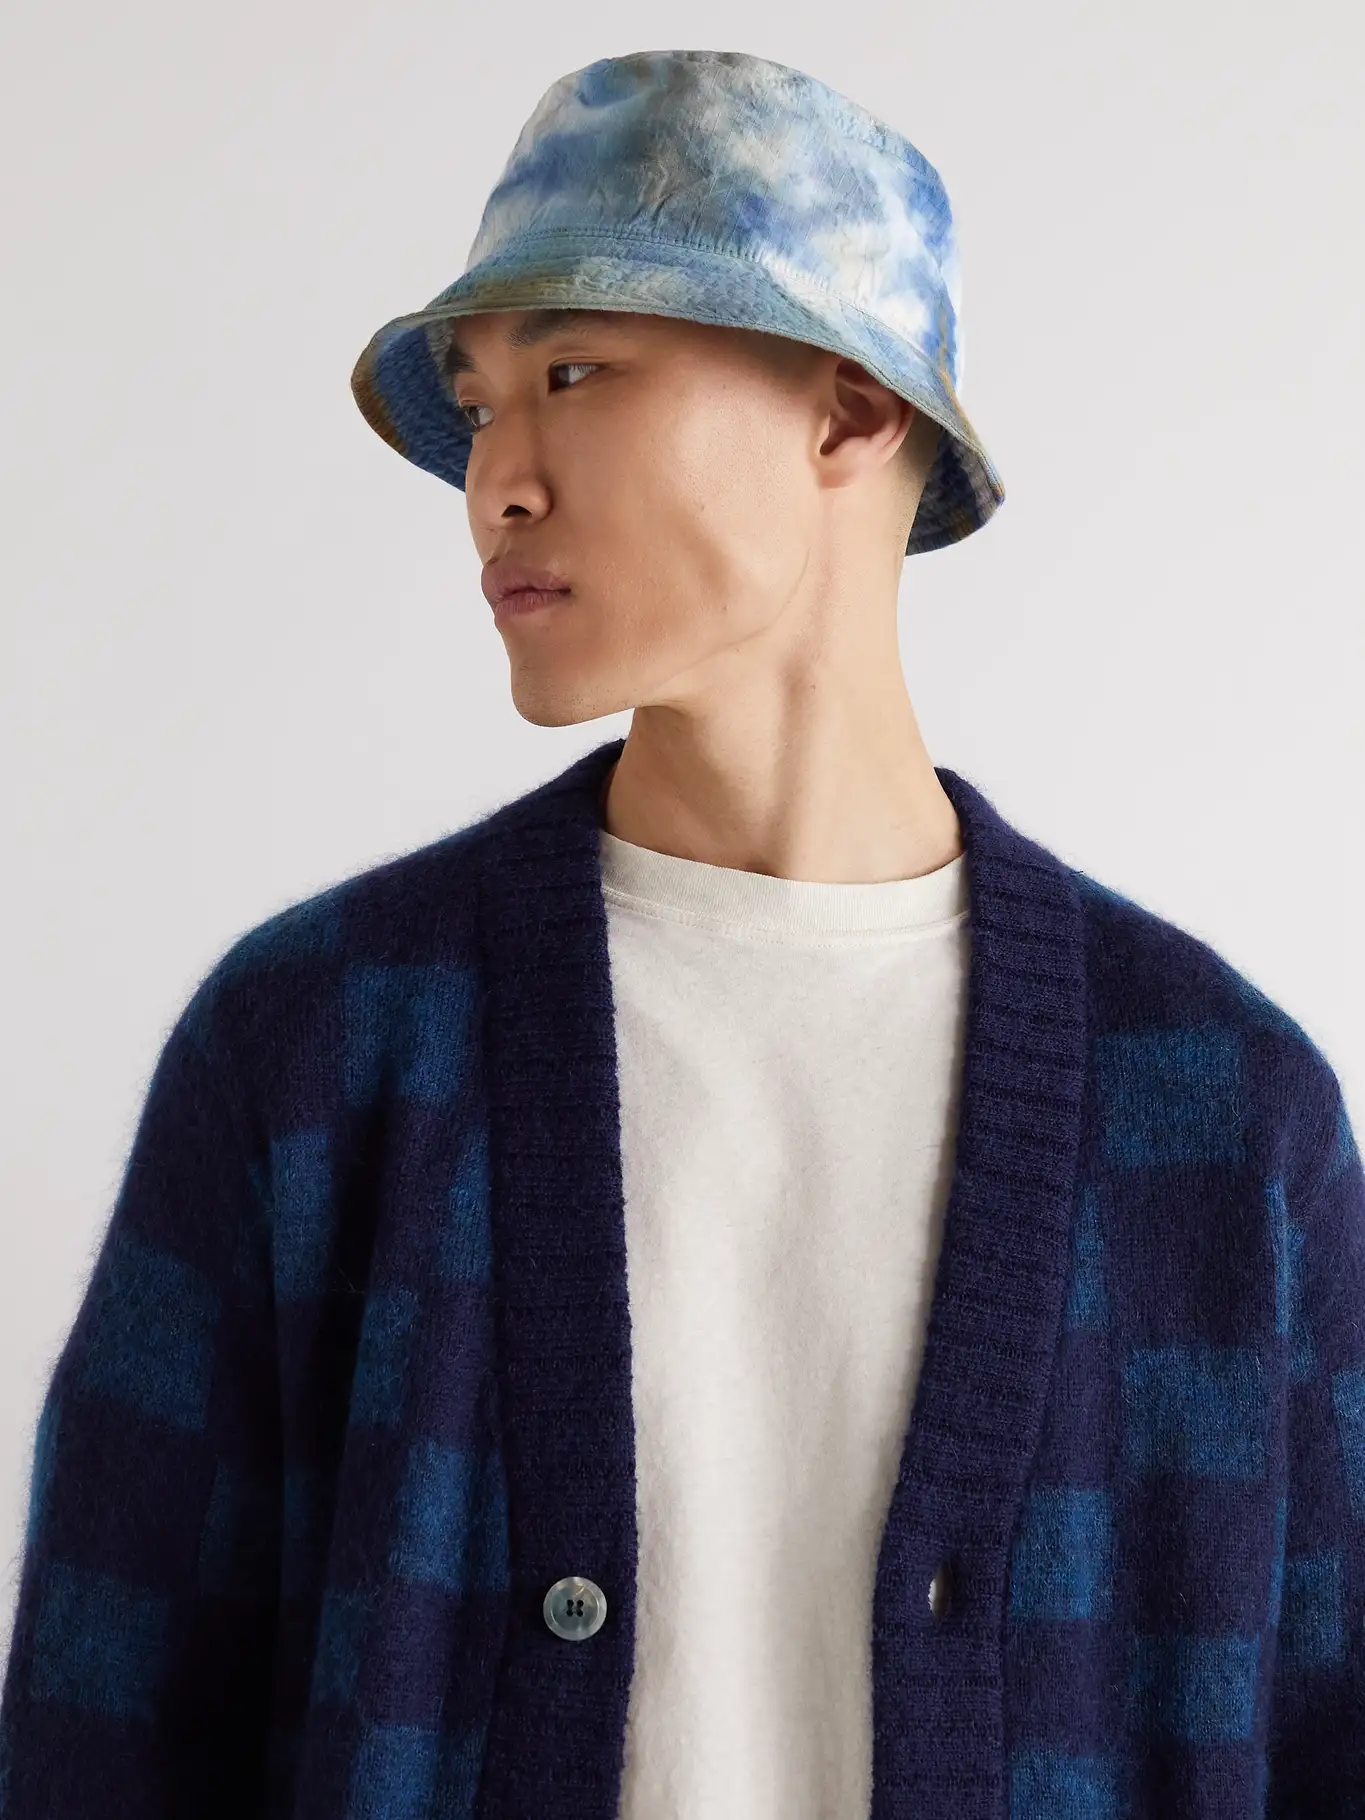 The Curated Man: Bucket Hats Tie-Dyed By Awesome Brands